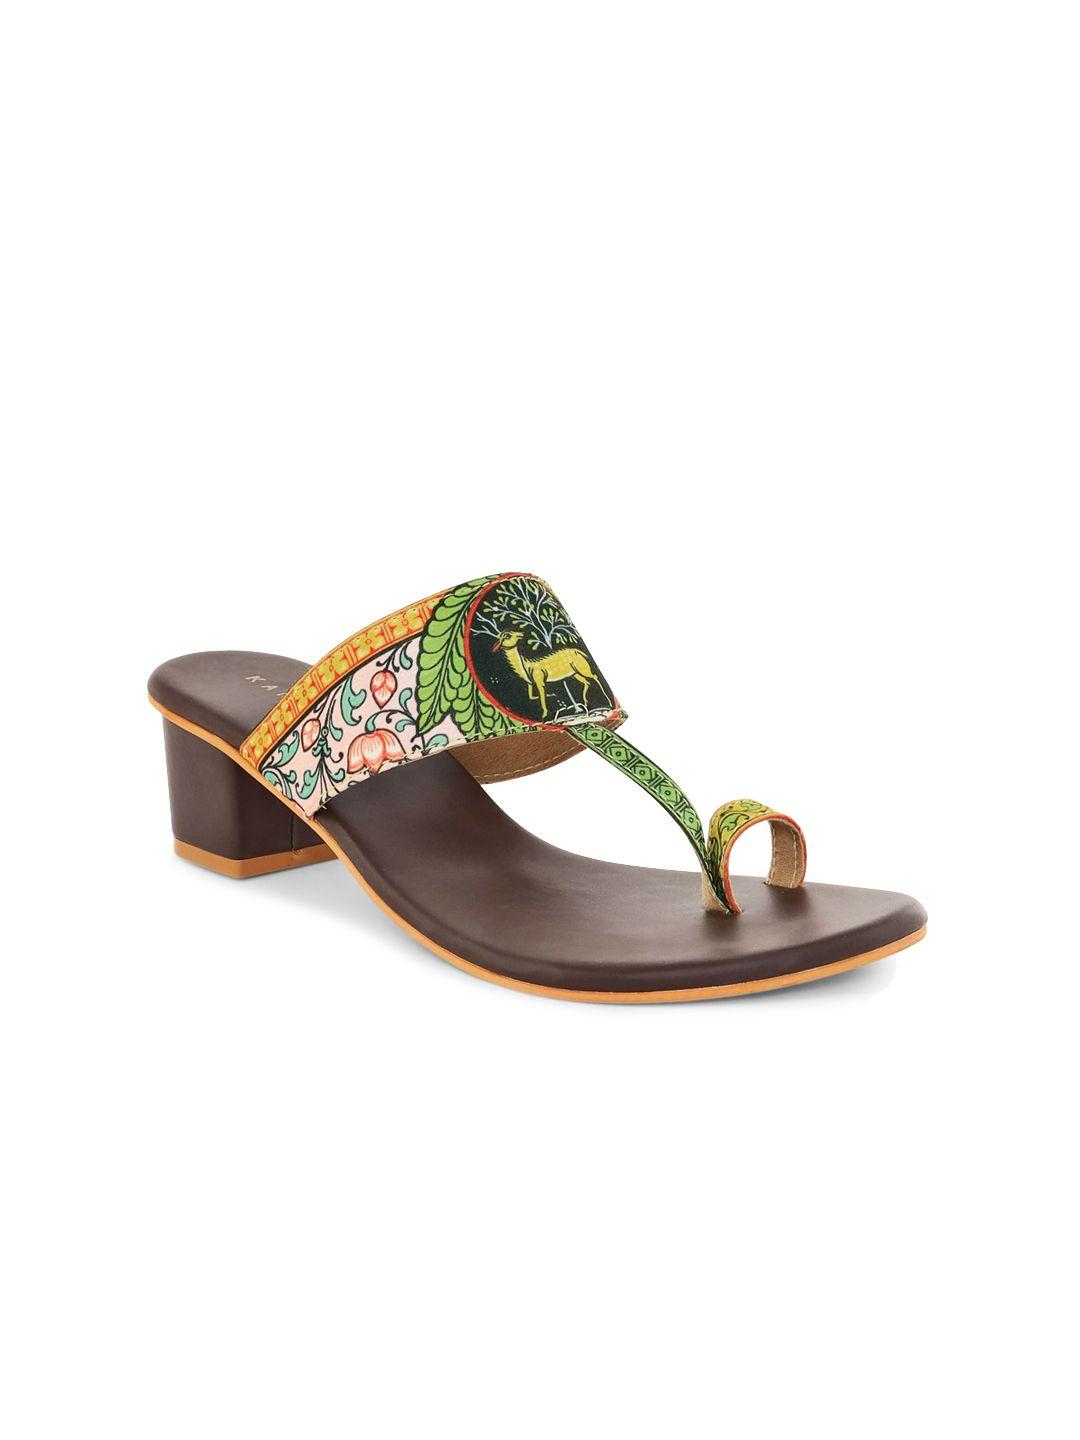 kanvas-women-multicoloured-printed-open-toe-flats-with-buckles